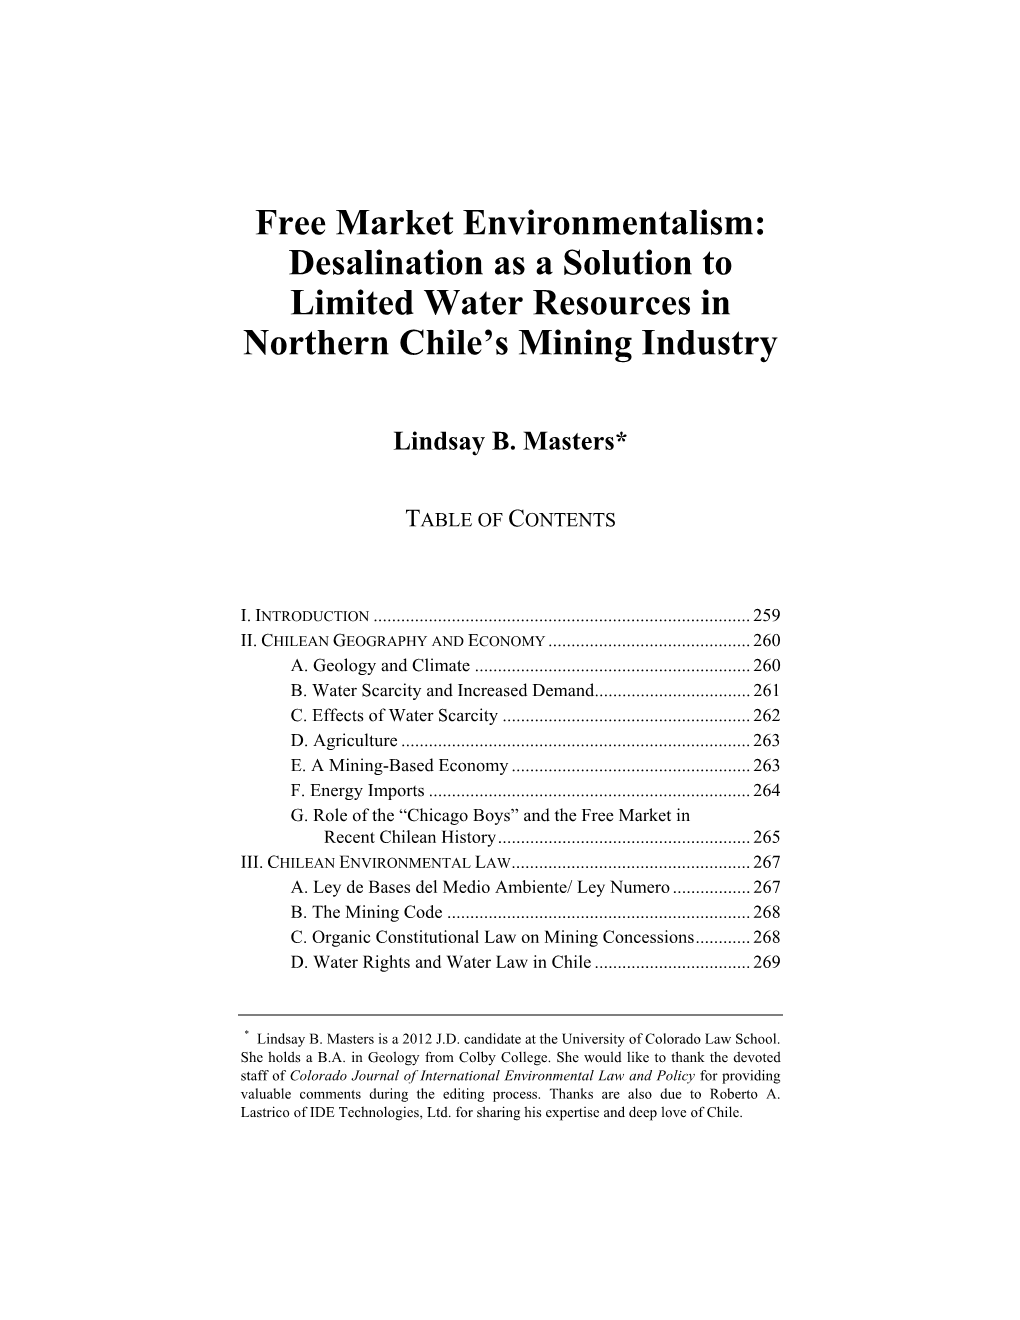 Free Market Environmentalism: Desalination As a Solution to Limited Water Resources in Northern Chile’S Mining Industry